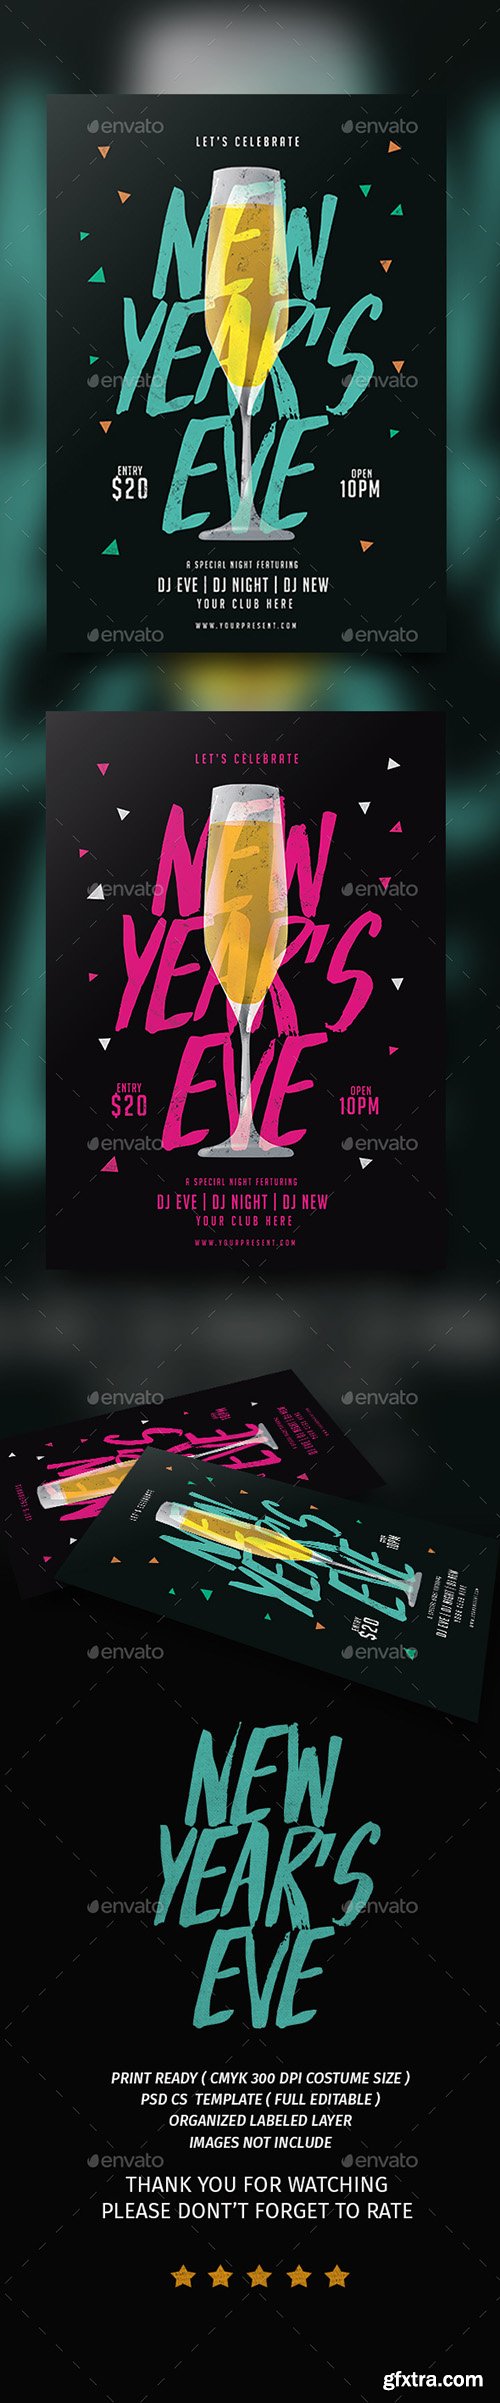 Graphicriver New Year Flyer 1907740